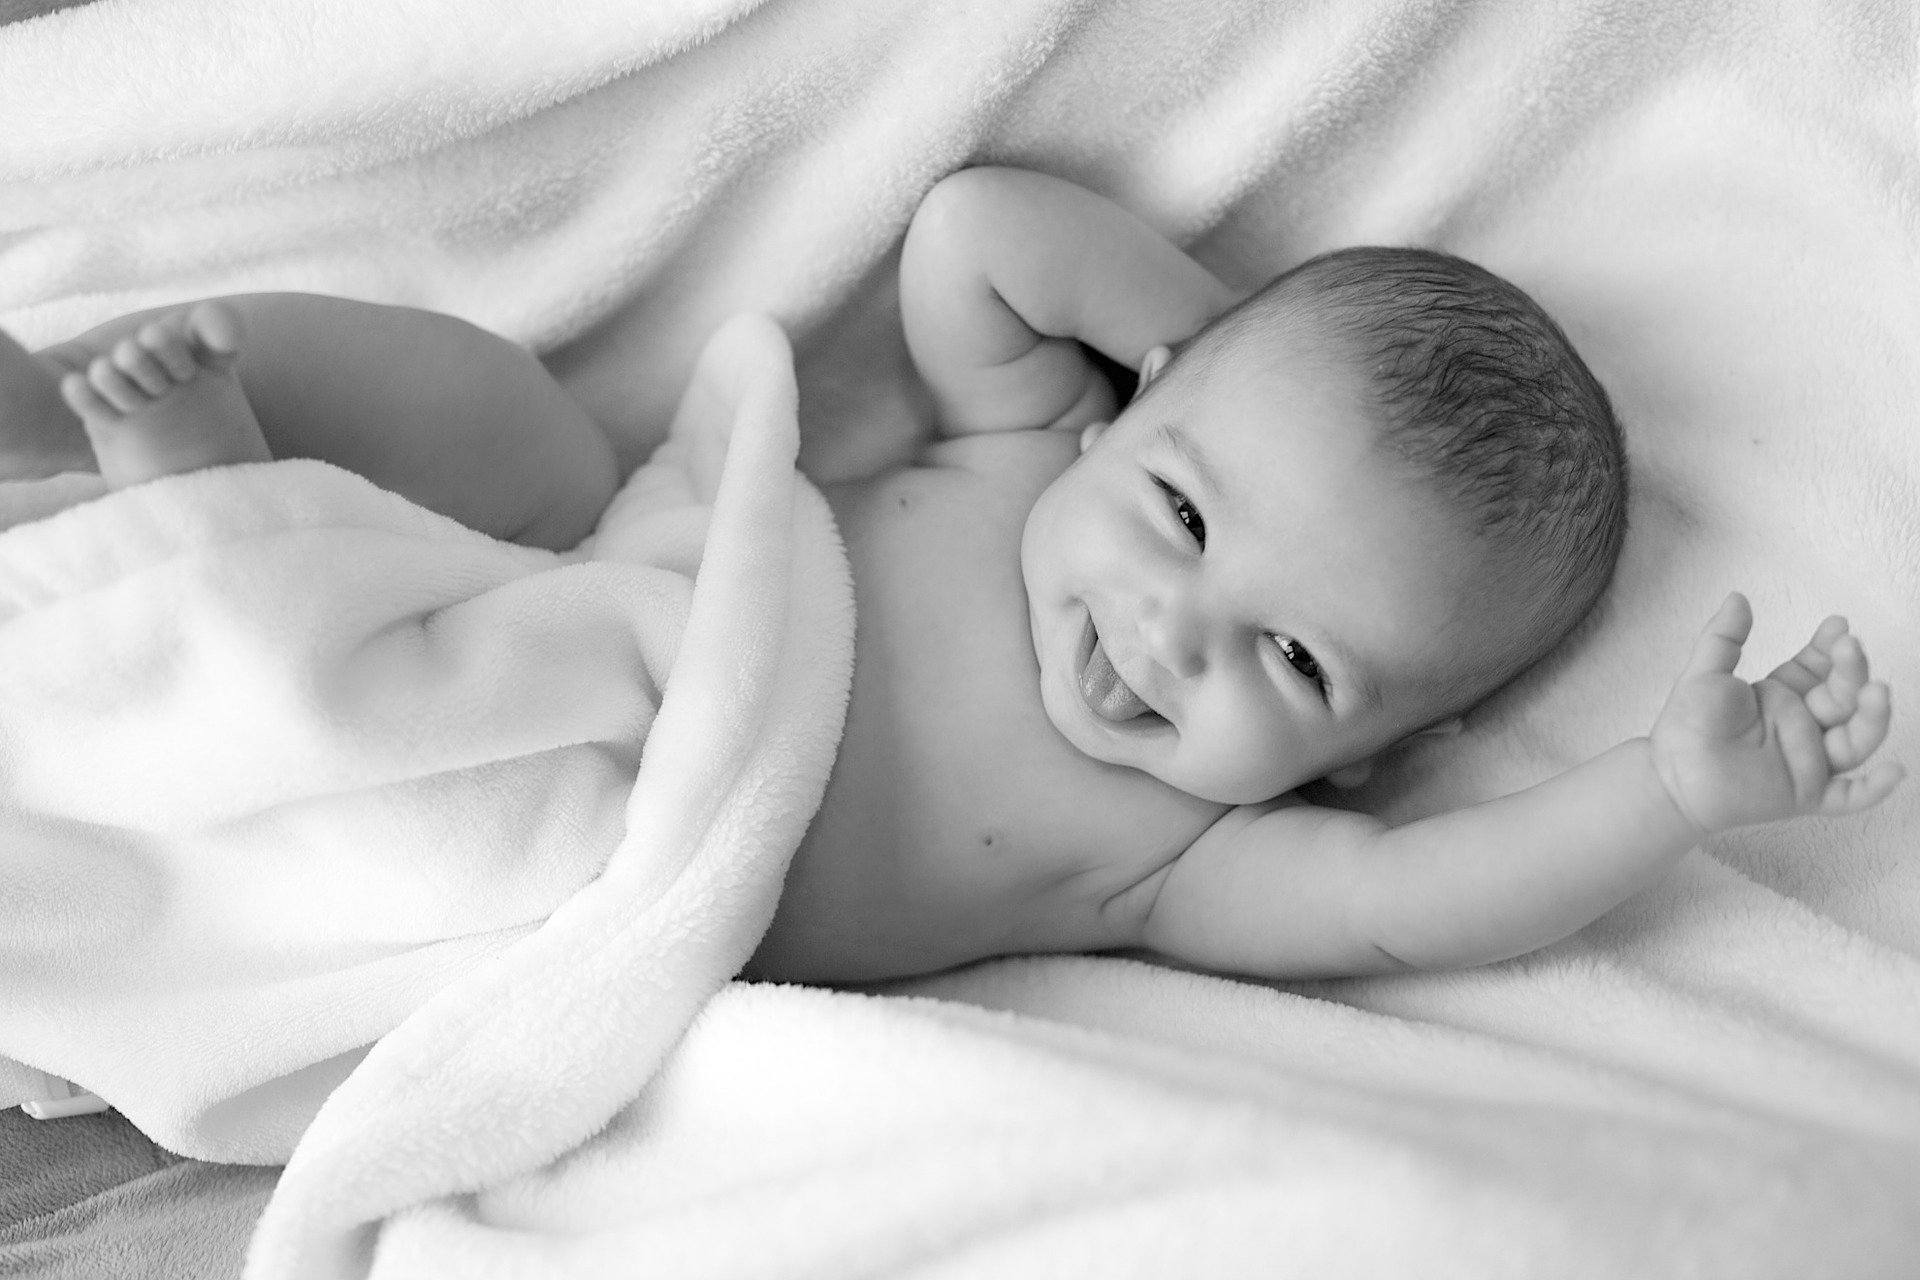 A baby smiling in bed. | Source: Pixabay 